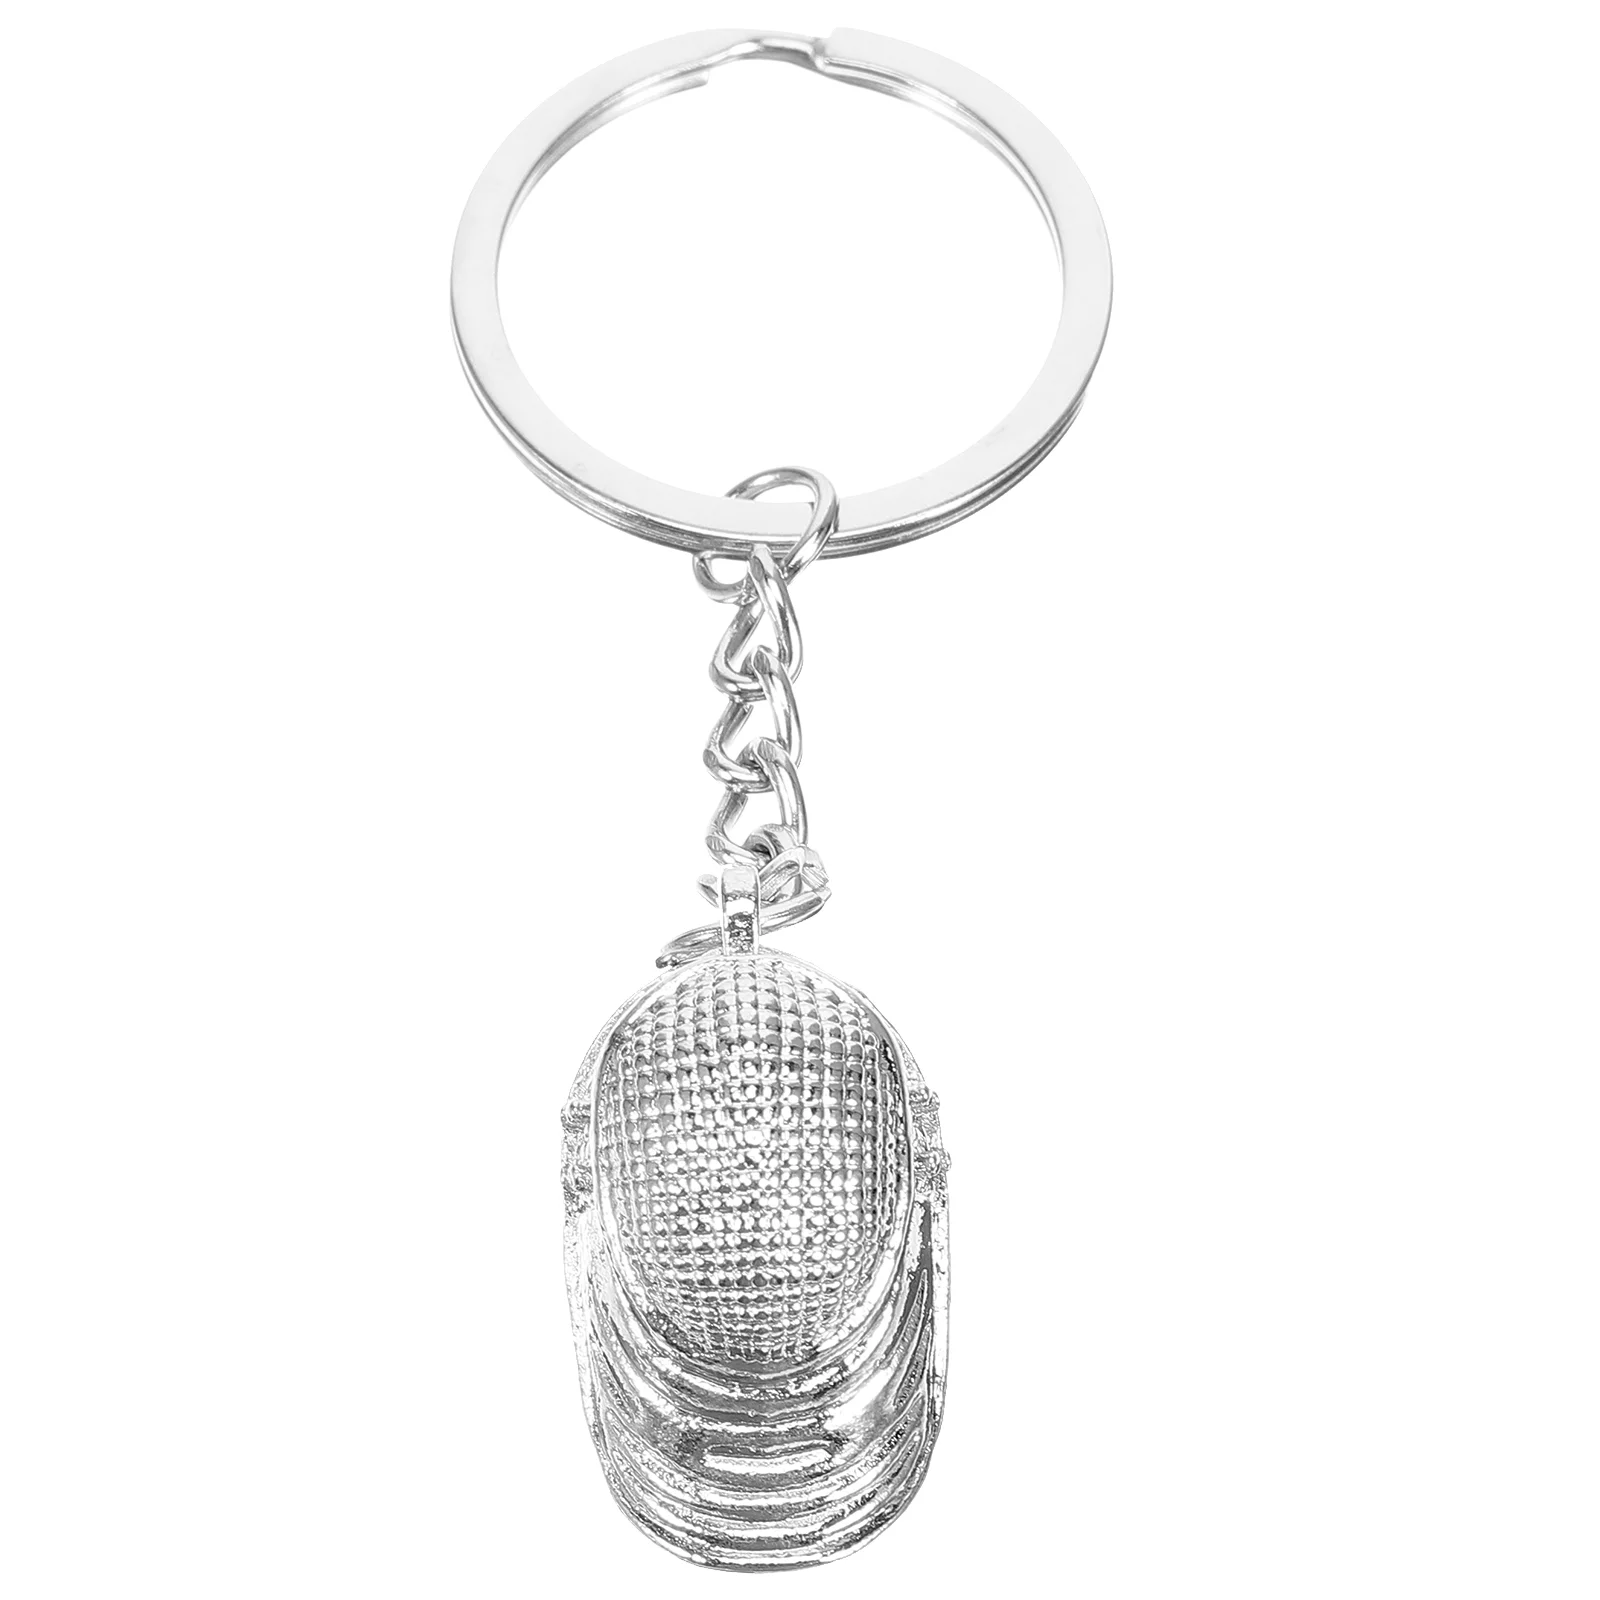 

Fencing Keychain Decorative Fencing Sport Metal Exquisite Backpack Pendant Souvenir Fencing Keychain Keychain For Gift Backpack